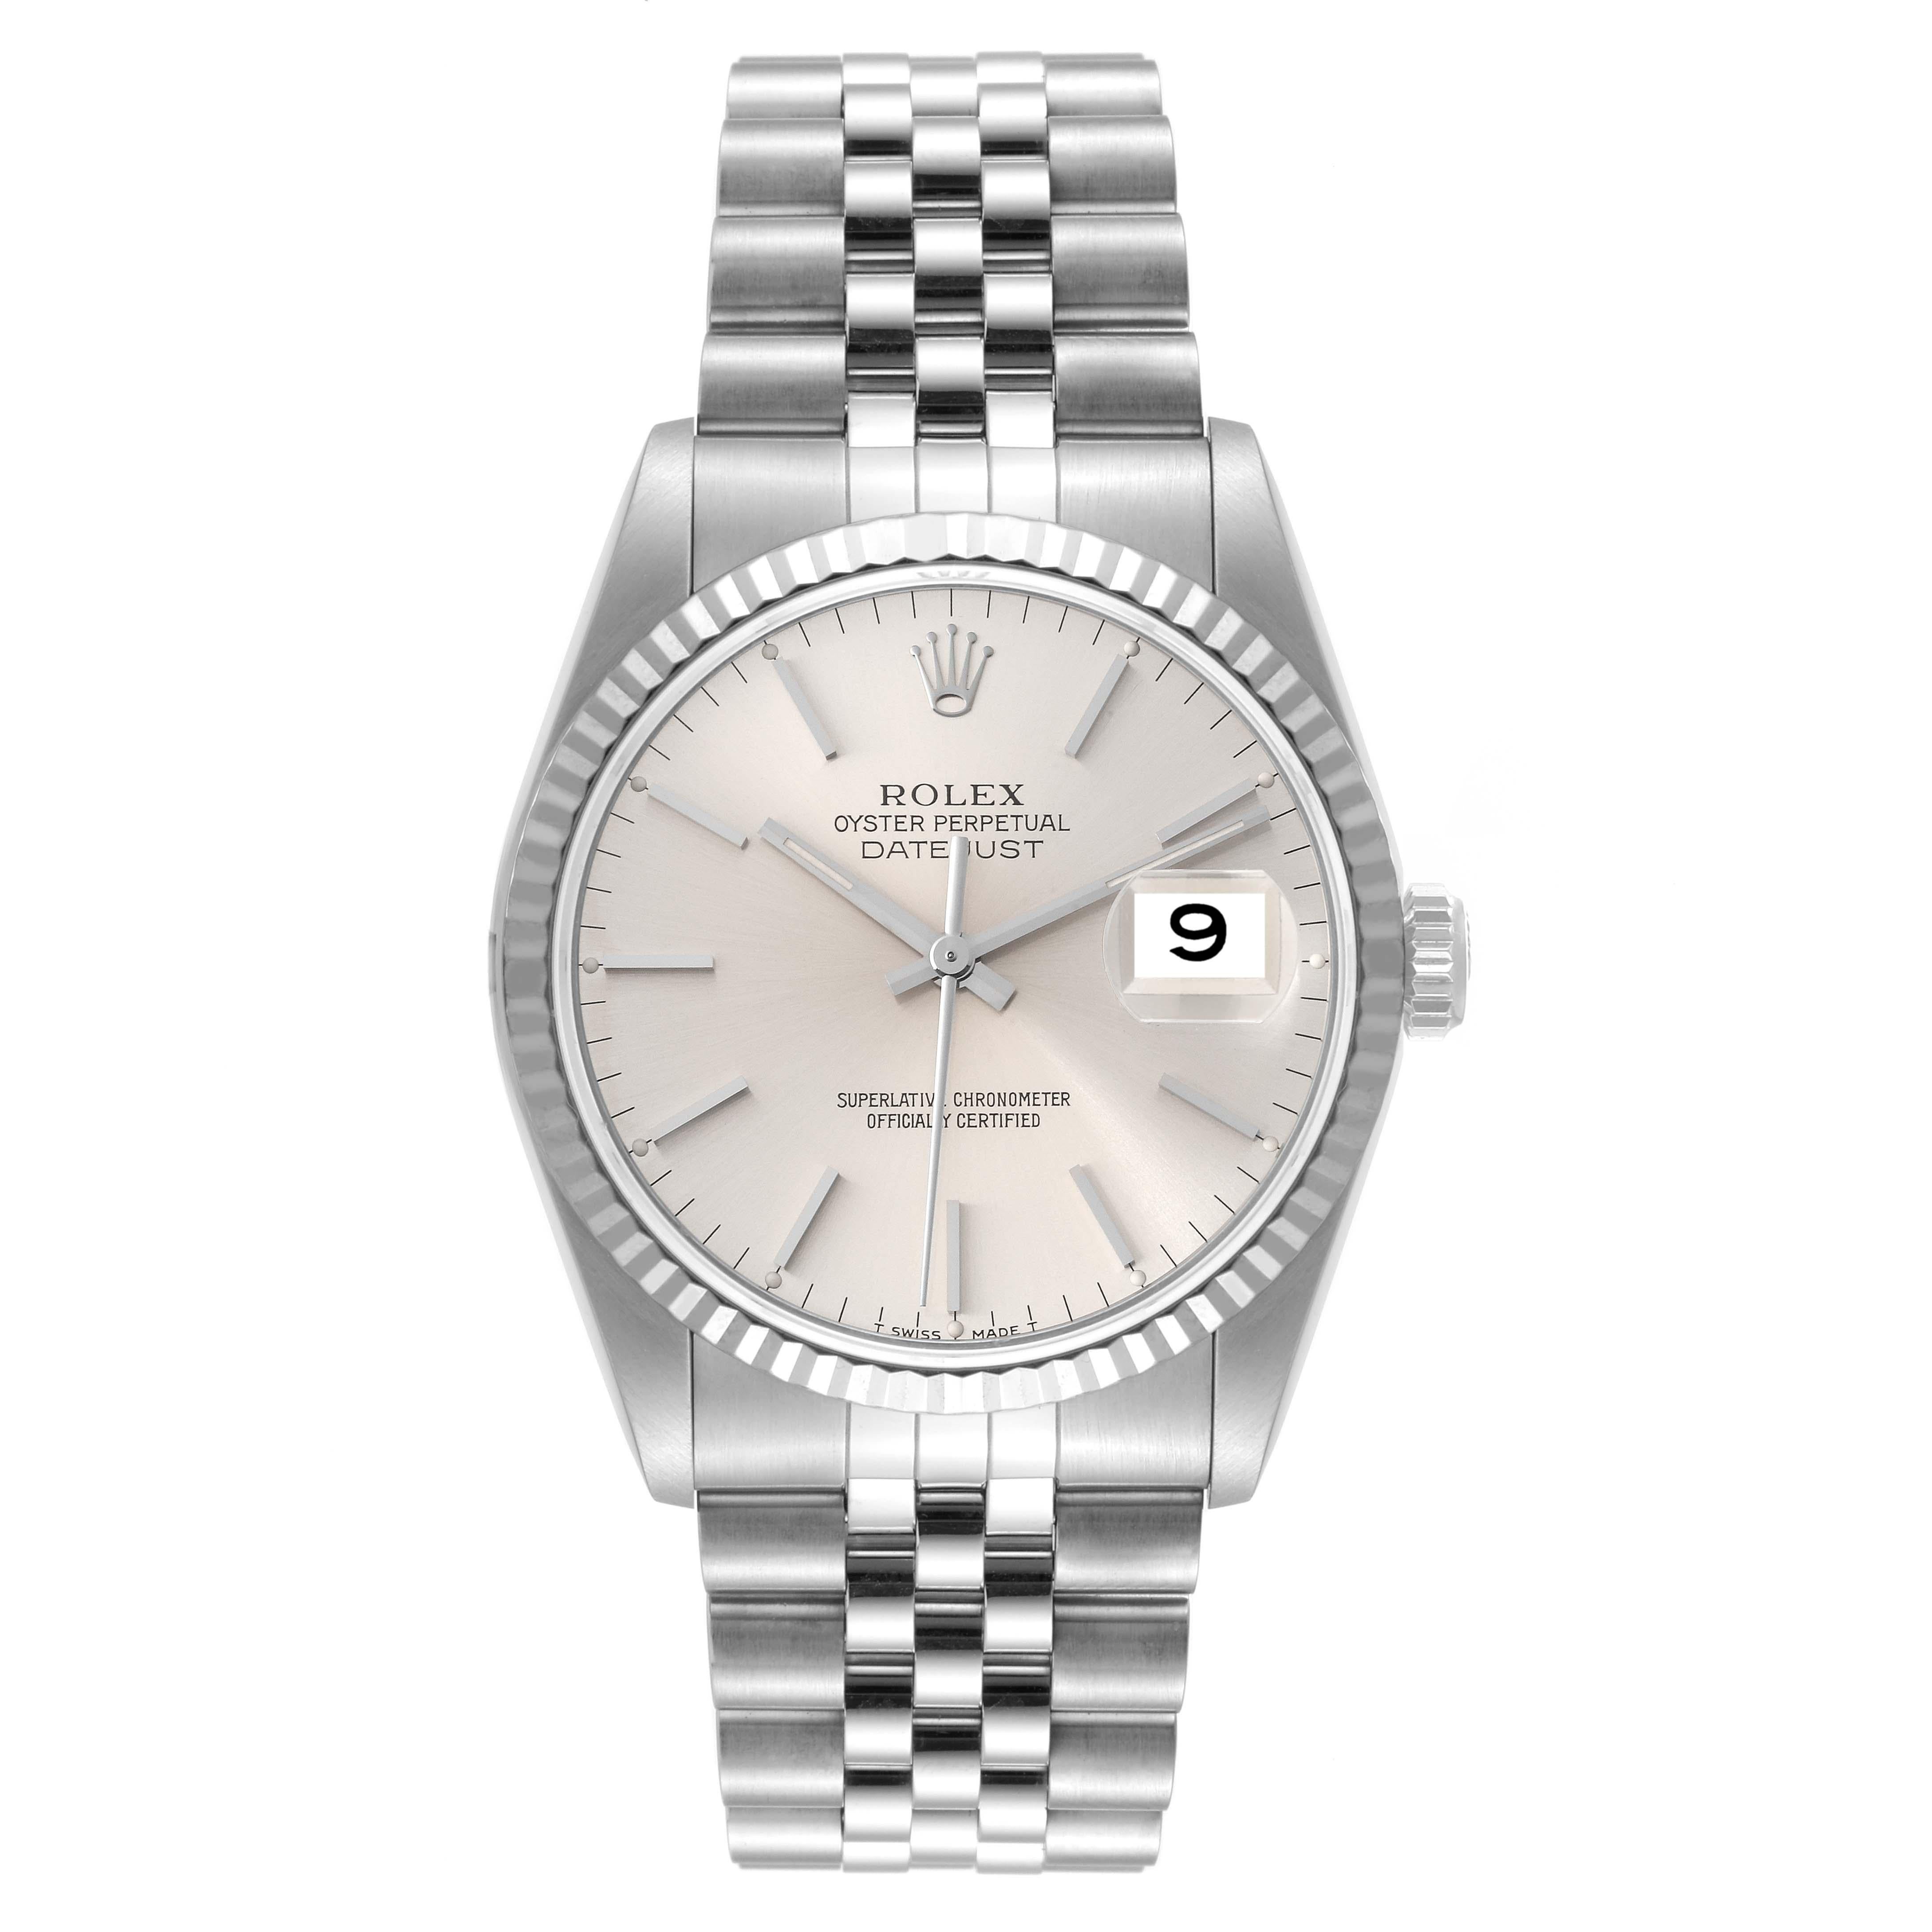 Rolex Datejust Steel White Gold Silver Dial Mens Watch 16234. Officially certified chronometer automatic self-winding movement. Stainless steel oyster case 36 mm in diameter. Rolex logo on the crown. 18k white gold fluted bezel. Scratch resistant